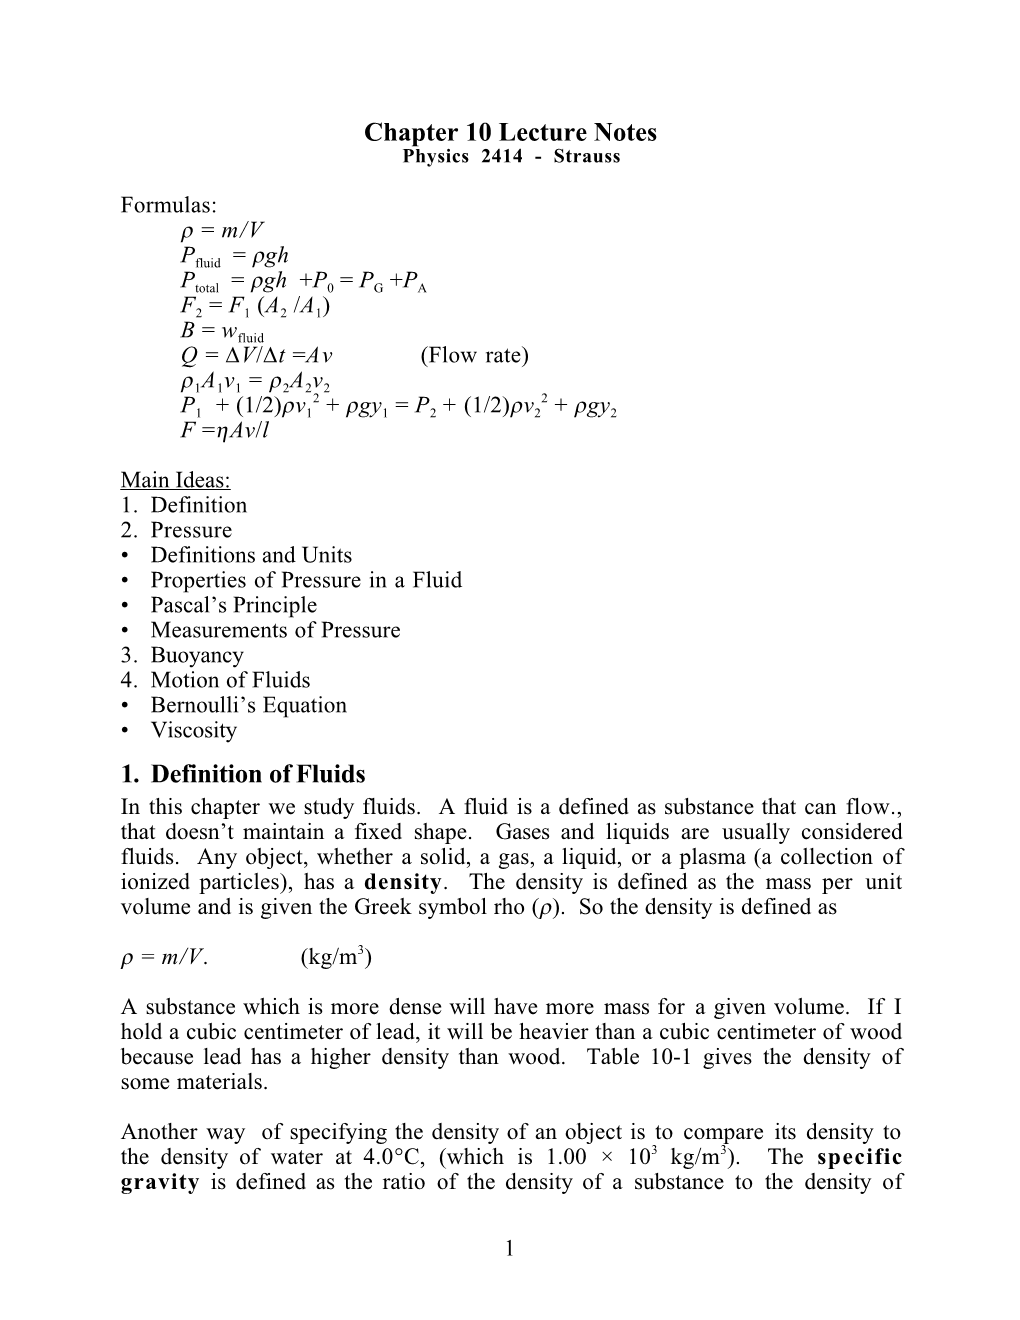 Chapter 10 Lecture Notes 1. Definition of Fluids